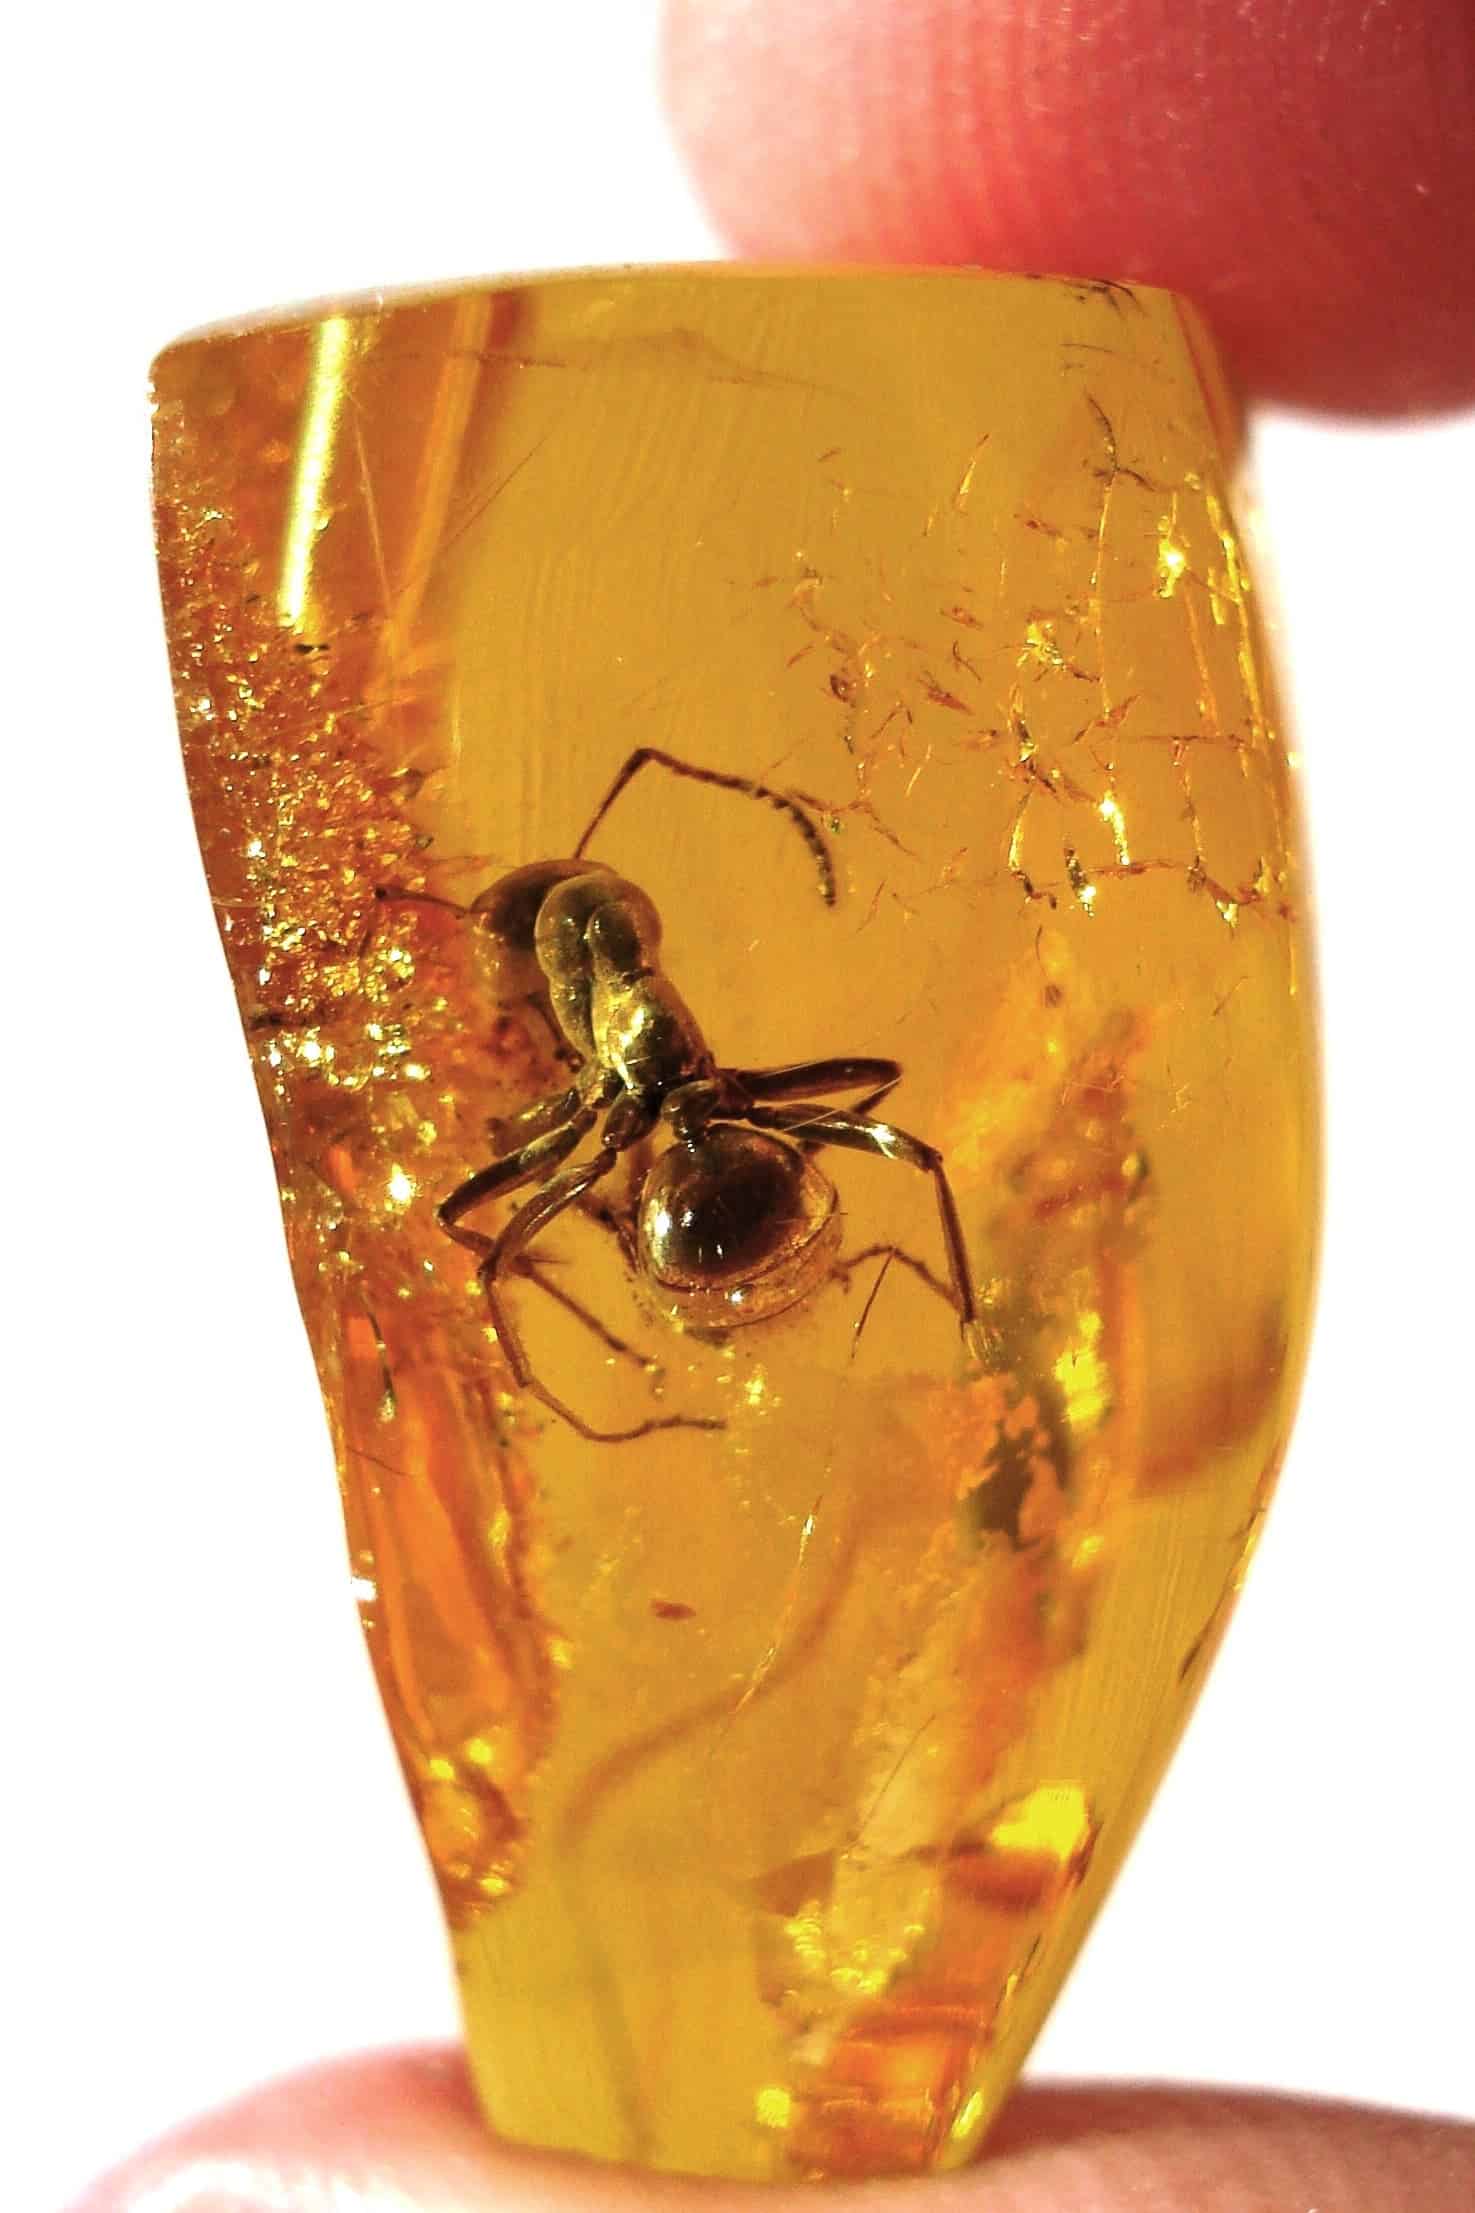 An ant inside of Baltic amber. Image credits: Anders L. Damgaard.